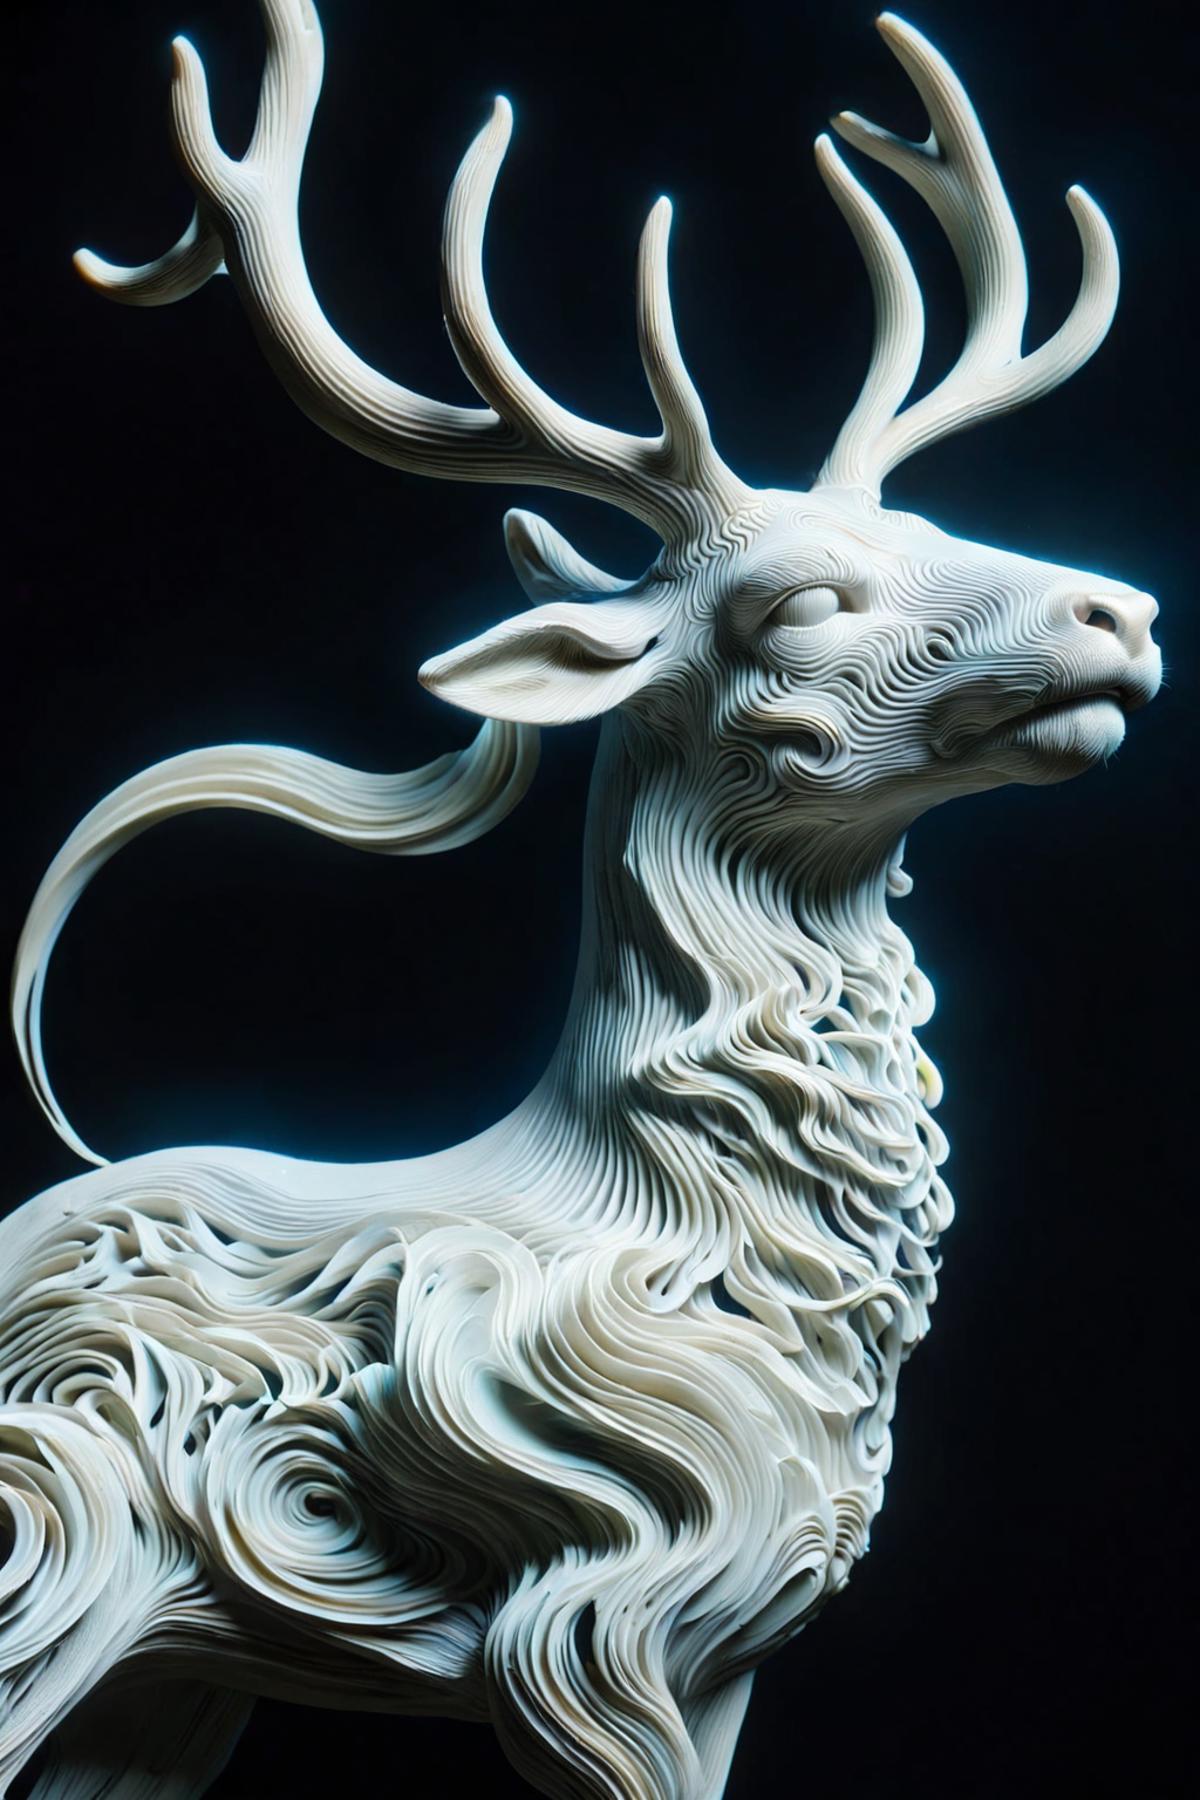 White Deer with Long Hair and Antlers, Close-up View